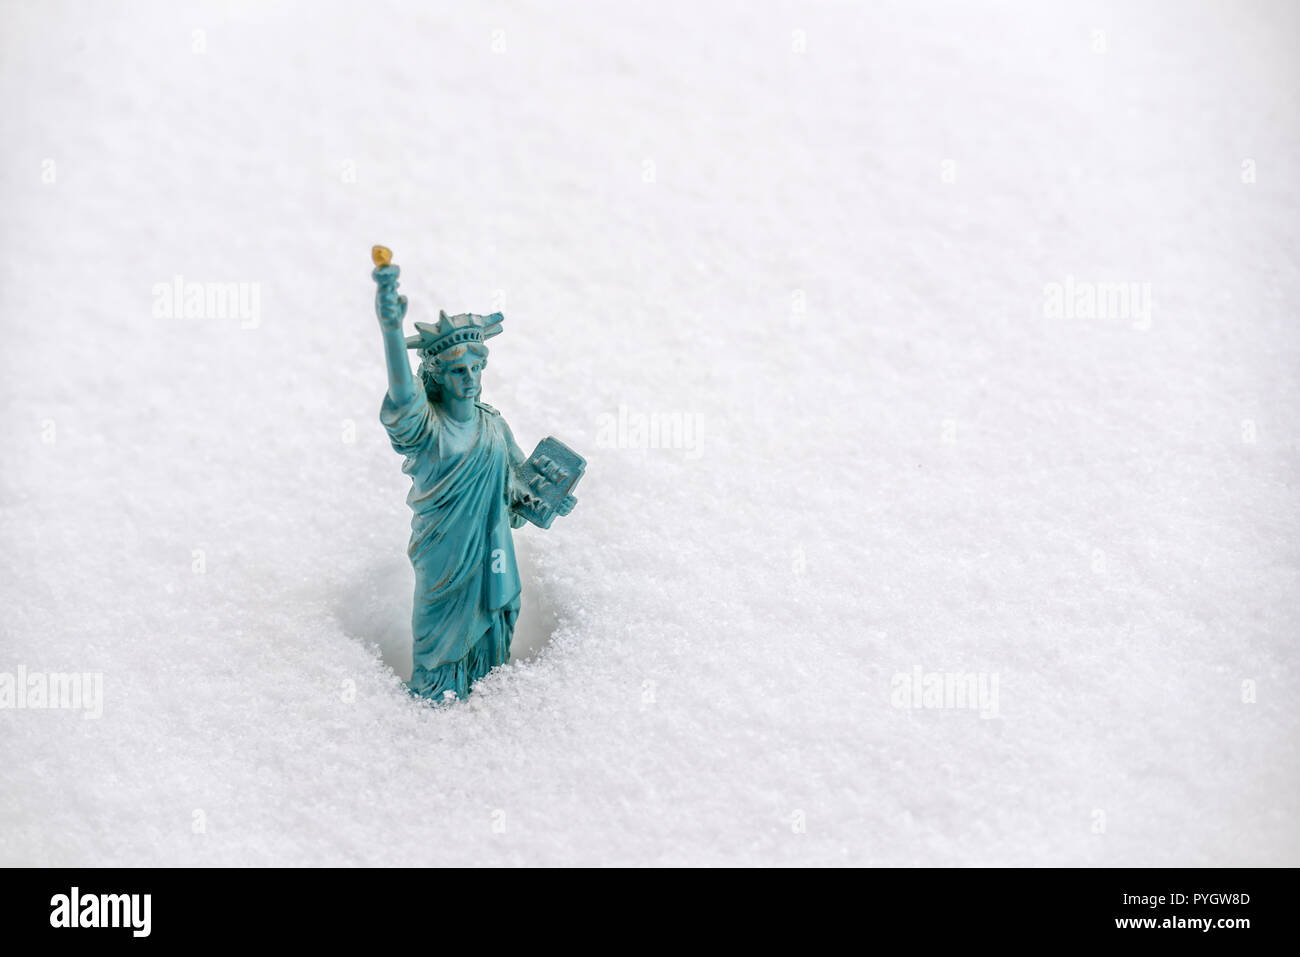 Statue of Liberty miniature in the snow. Winter snowfall in New York concept Stock Photo